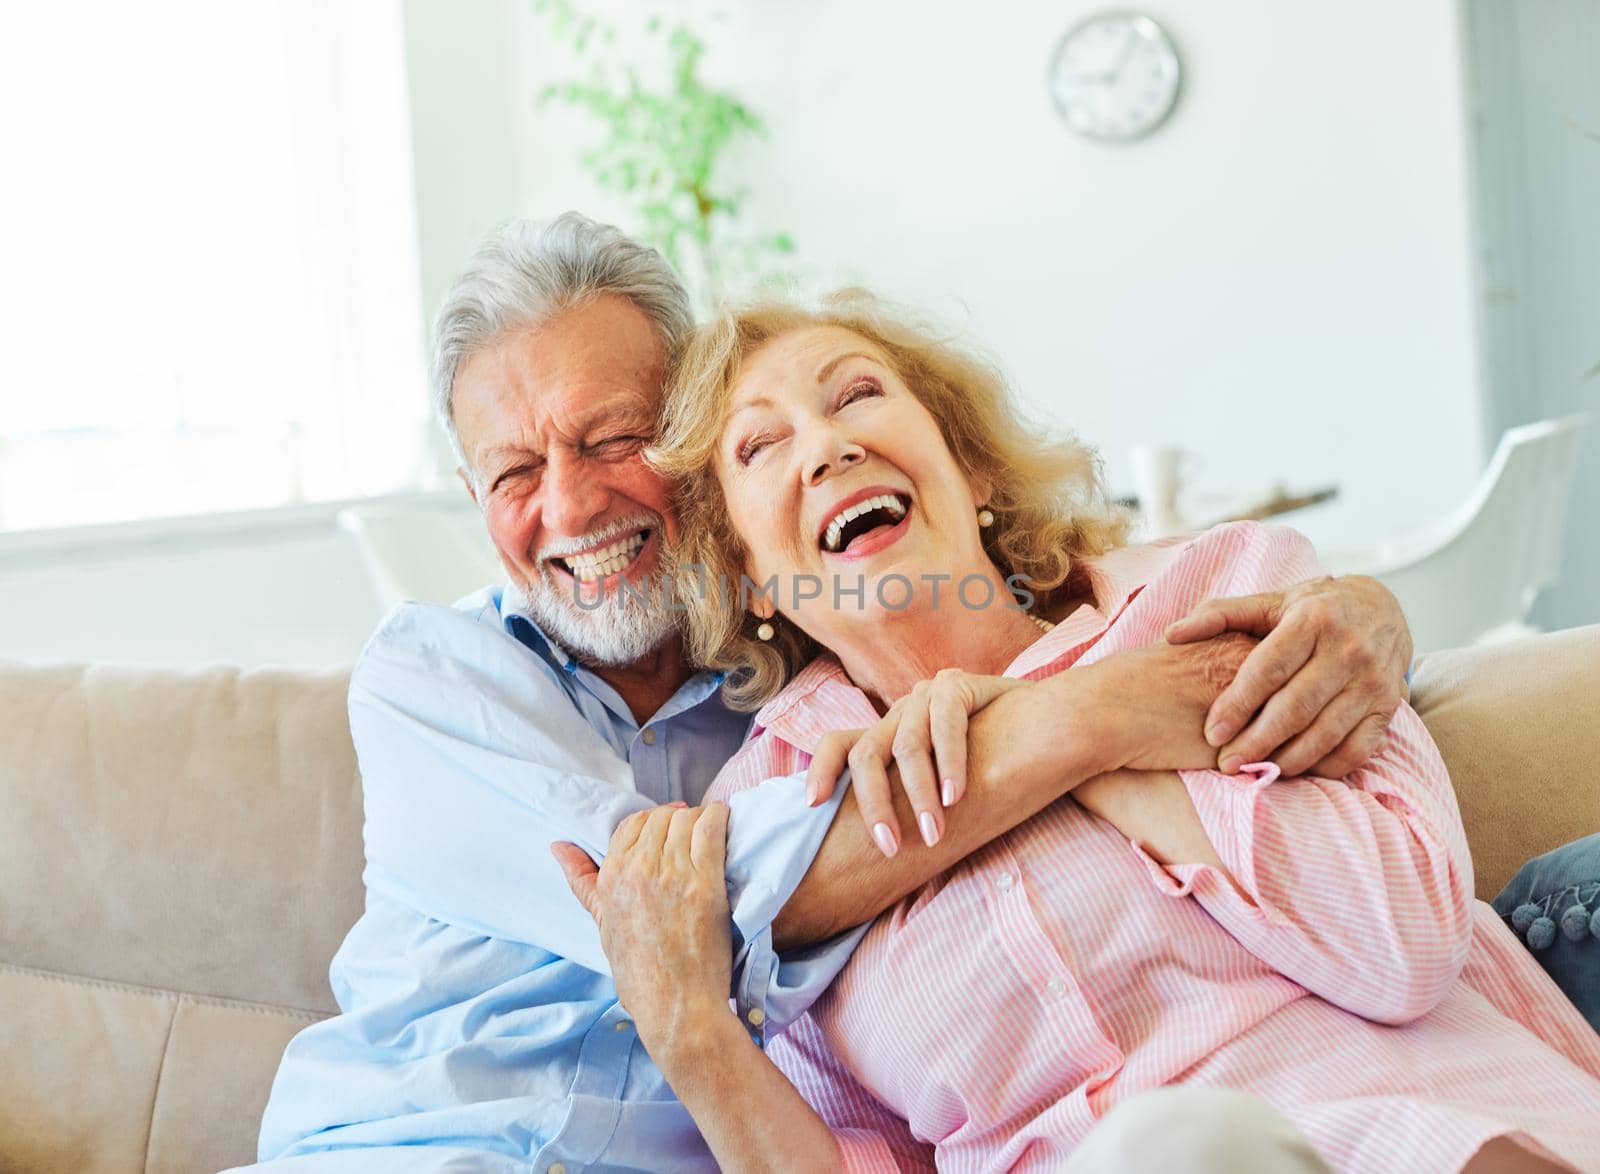 Portrait of a happy senior couple embracing hugging and having fun at home